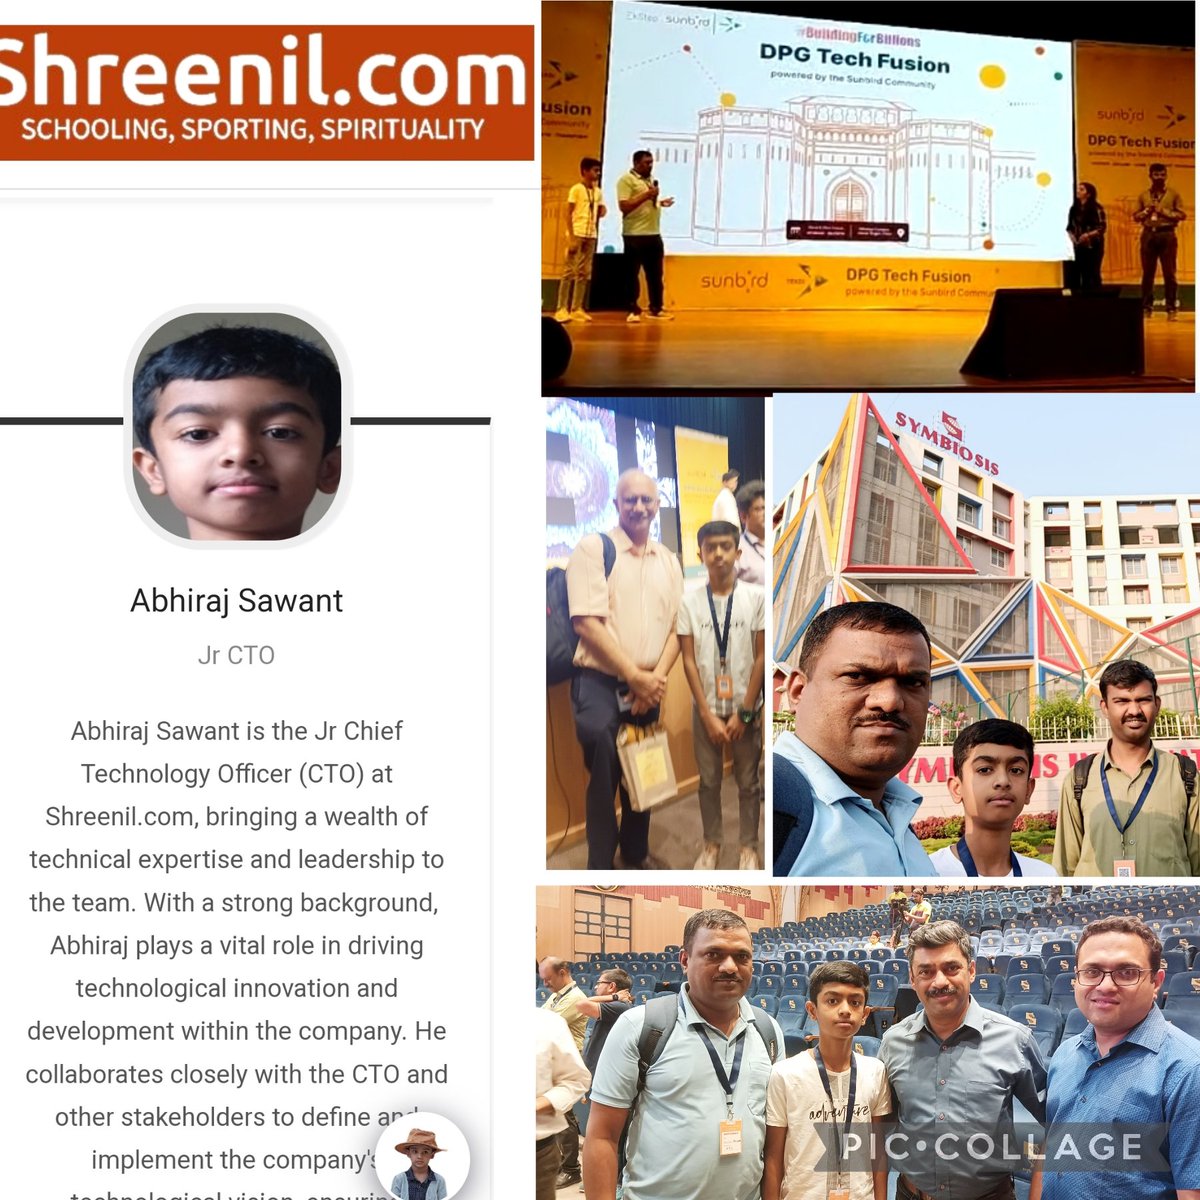 At #DPGtechfusi #hackathon Energized by organizers @Sunbird_EkStep & @tekdinet, our team ranked in the top 7 of 23, Learned from IT legends, fueled to innovate for Global #India. #BuildForBillions #shreenil.com 
@narendramodi @pramodkvarma
🔗Stage Talk: instagram.com/reel/C43JGrHPG…